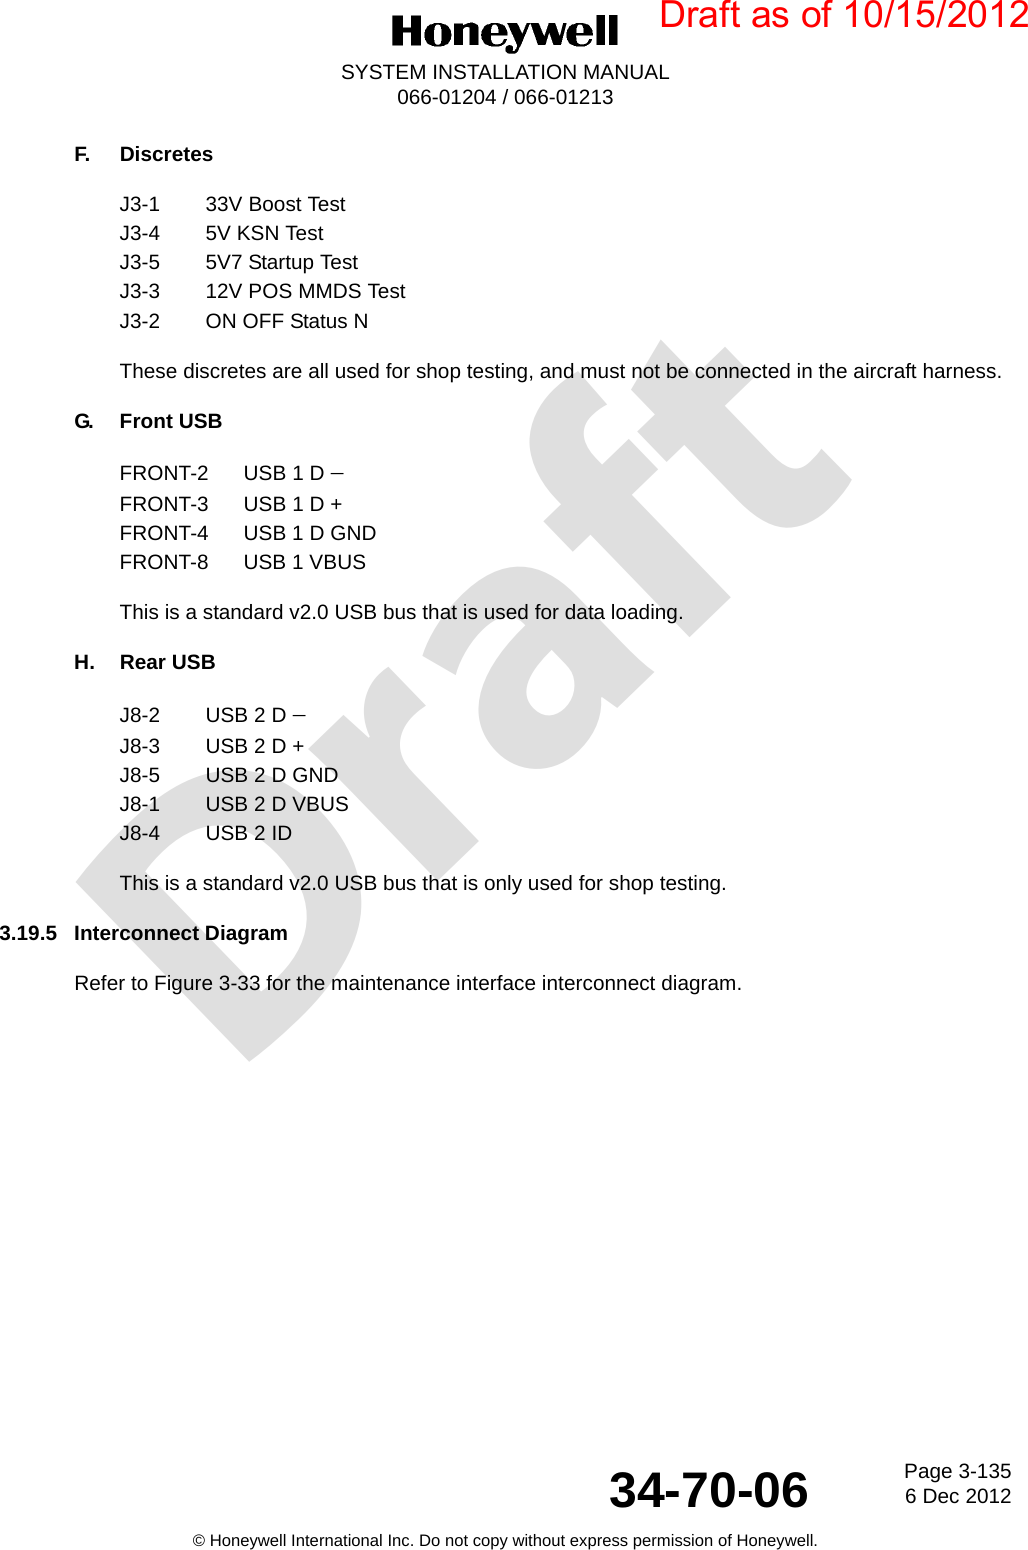 DraftPage 3-1356 Dec 201234-70-06SYSTEM INSTALLATION MANUAL066-01204 / 066-01213© Honeywell International Inc. Do not copy without express permission of Honeywell.F. DiscretesJ3-1 33V Boost TestJ3-4 5V KSN TestJ3-5 5V7 Startup TestJ3-3 12V POS MMDS TestJ3-2 ON OFF Status NThese discretes are all used for shop testing, and must not be connected in the aircraft harness.G. Front USBFRONT-2 USB 1 D FRONT-3 USB 1 D +FRONT-4 USB 1 D GNDFRONT-8 USB 1 VBUSThis is a standard v2.0 USB bus that is used for data loading.H. Rear USBJ8-2 USB 2 D J8-3 USB 2 D +J8-5 USB 2 D GNDJ8-1 USB 2 D VBUSJ8-4 USB 2 IDThis is a standard v2.0 USB bus that is only used for shop testing.3.19.5 Interconnect DiagramRefer to Figure 3-33 for the maintenance interface interconnect diagram.Draft as of 10/15/2012